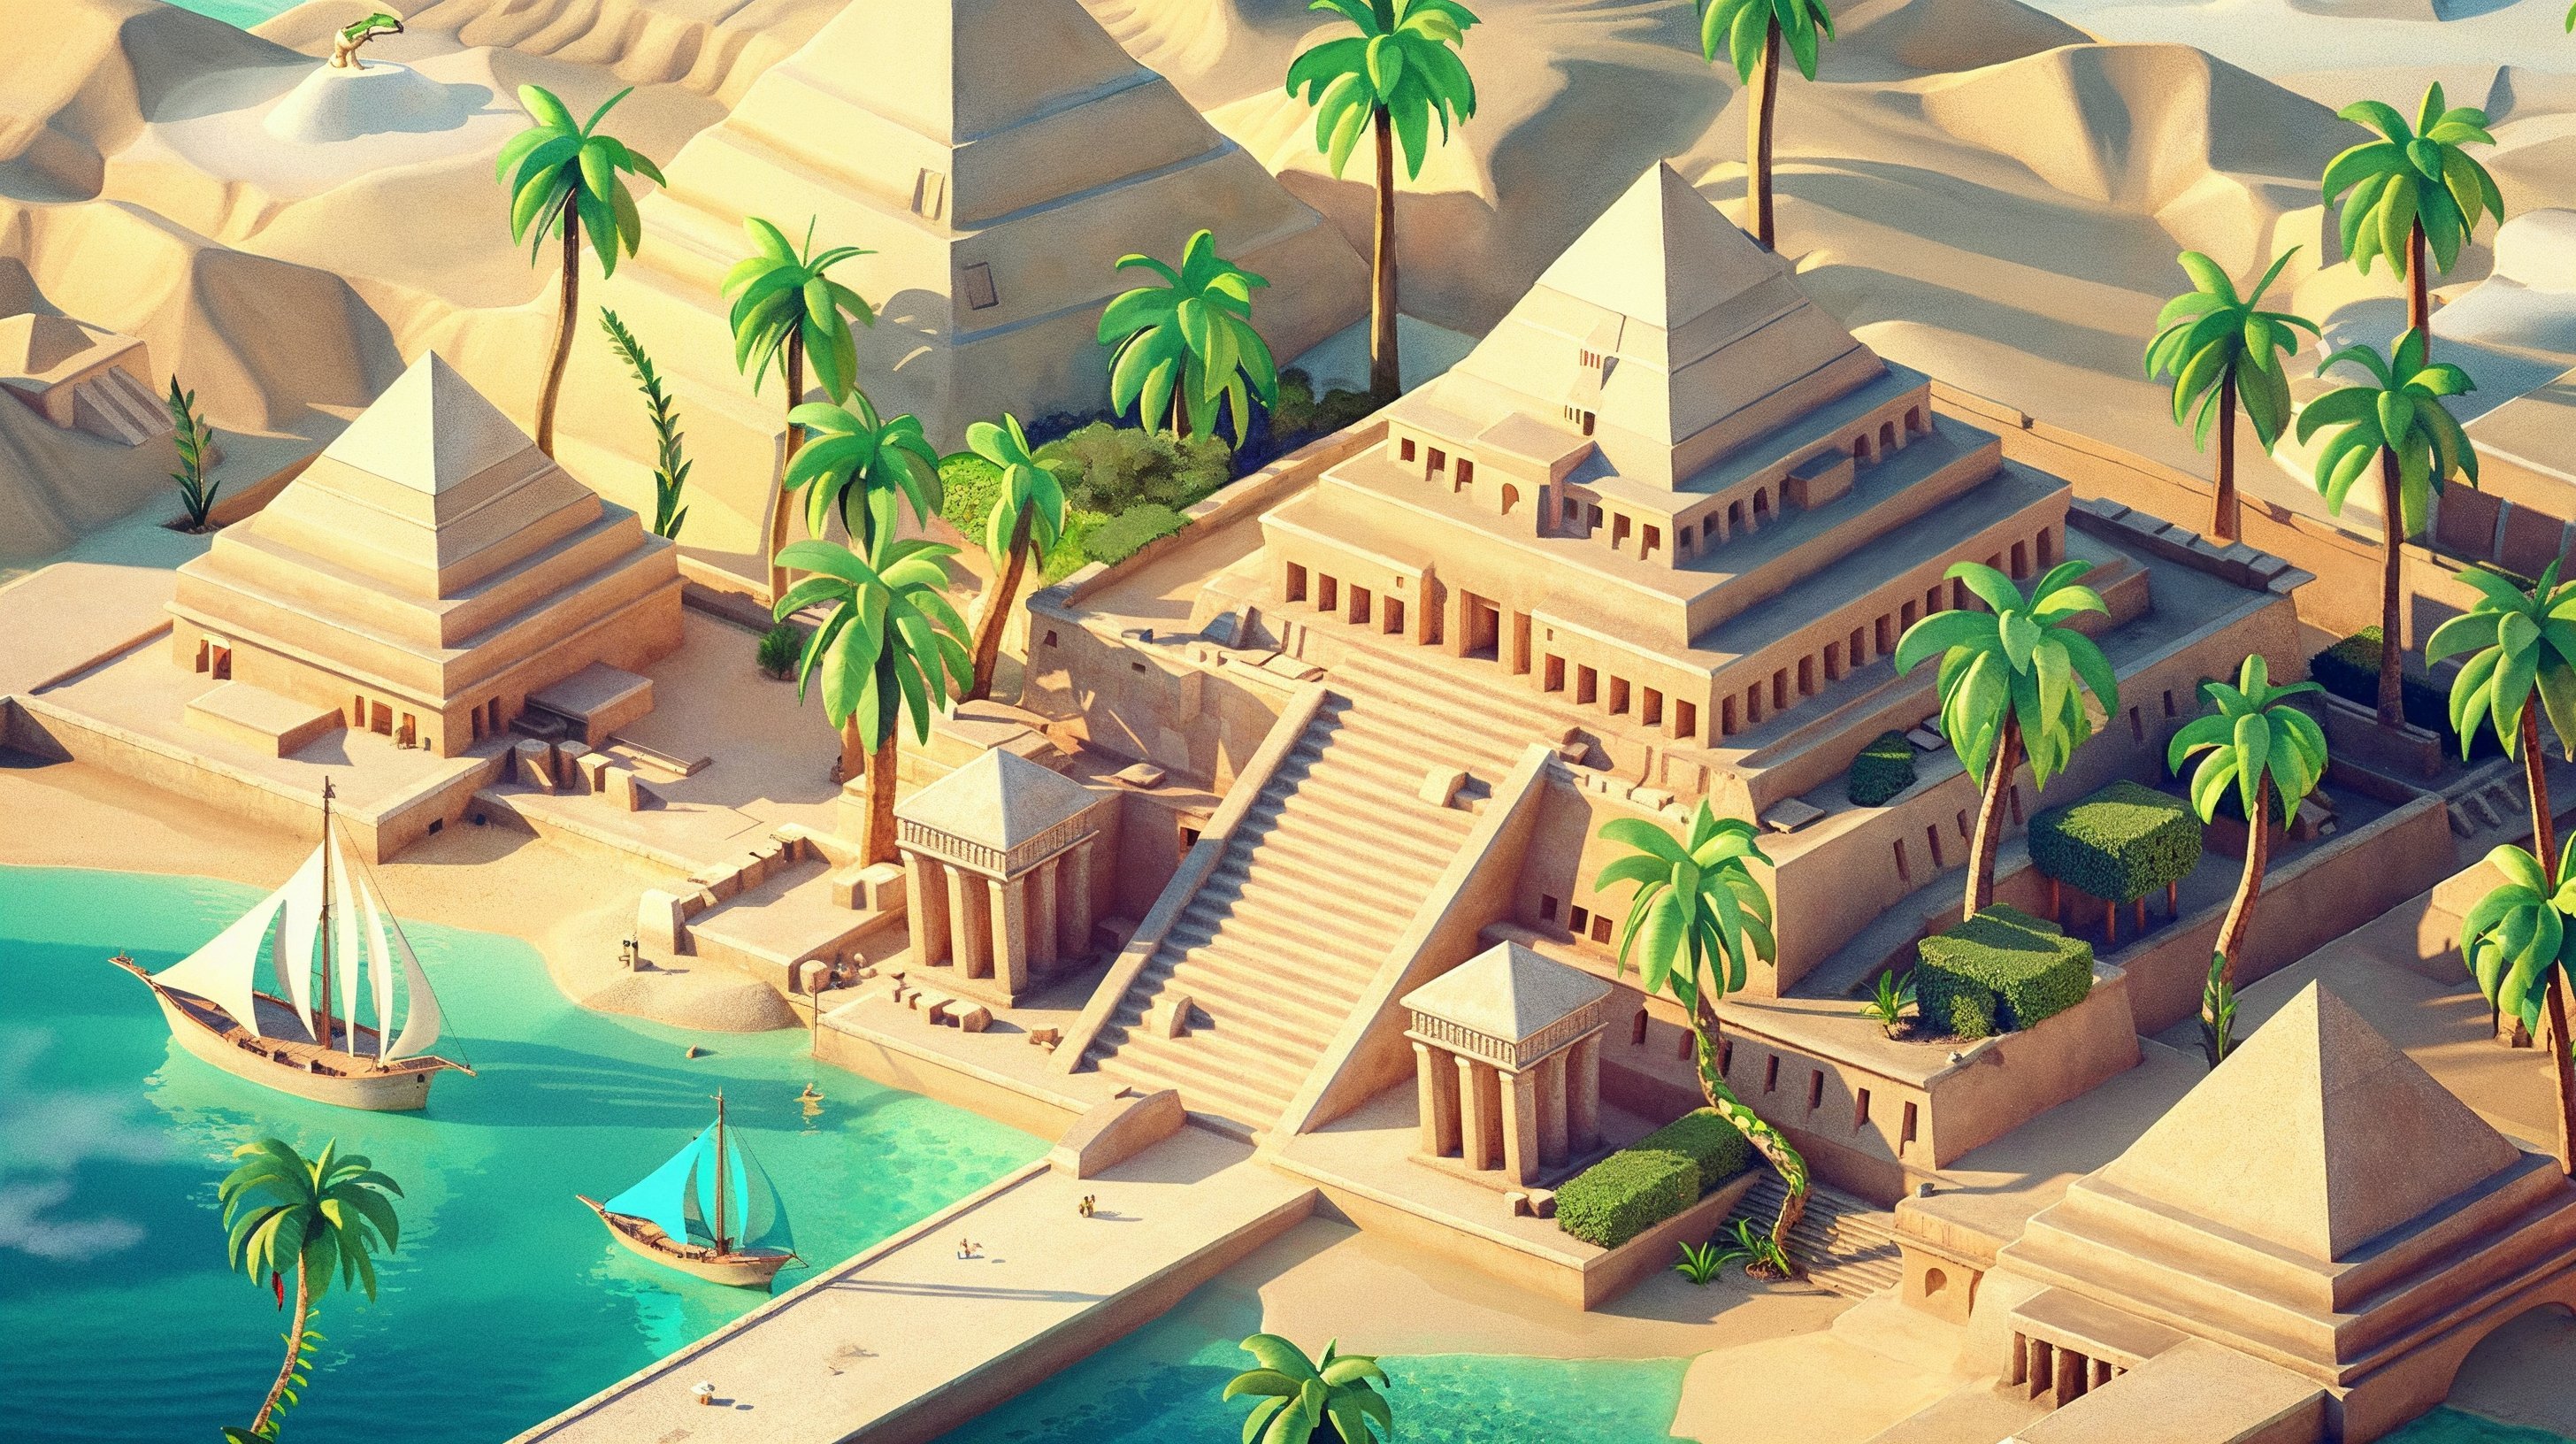 Isometric HD wallpaper depicting an ancient Egyptian landscape with pyramids, palm trees, and a river with boats.